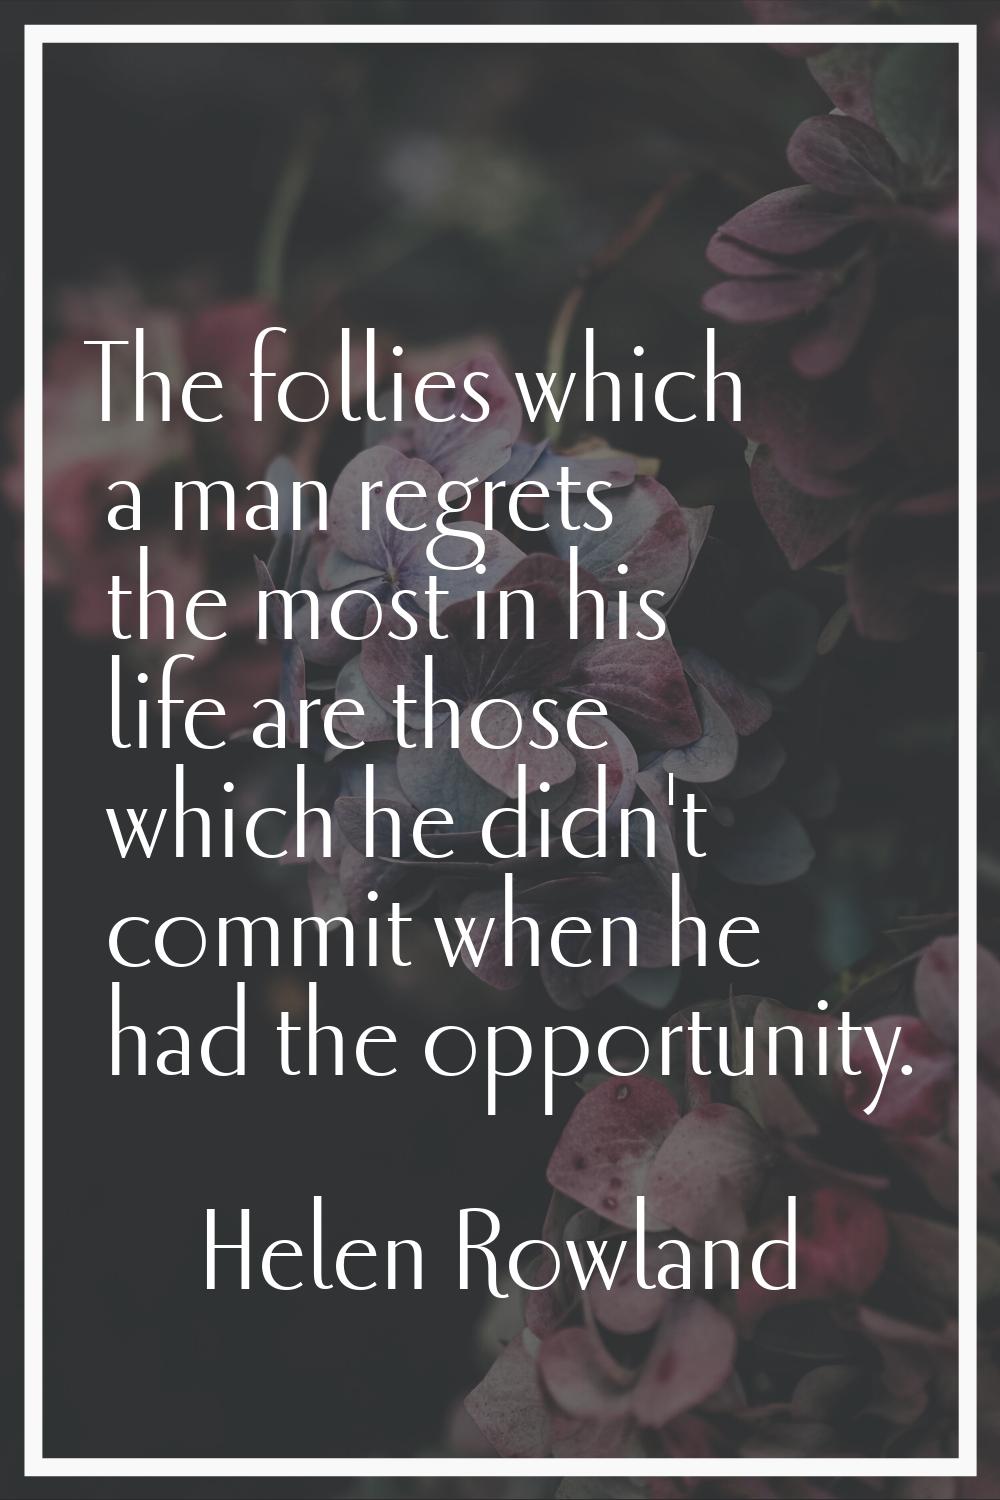 The follies which a man regrets the most in his life are those which he didn't commit when he had t